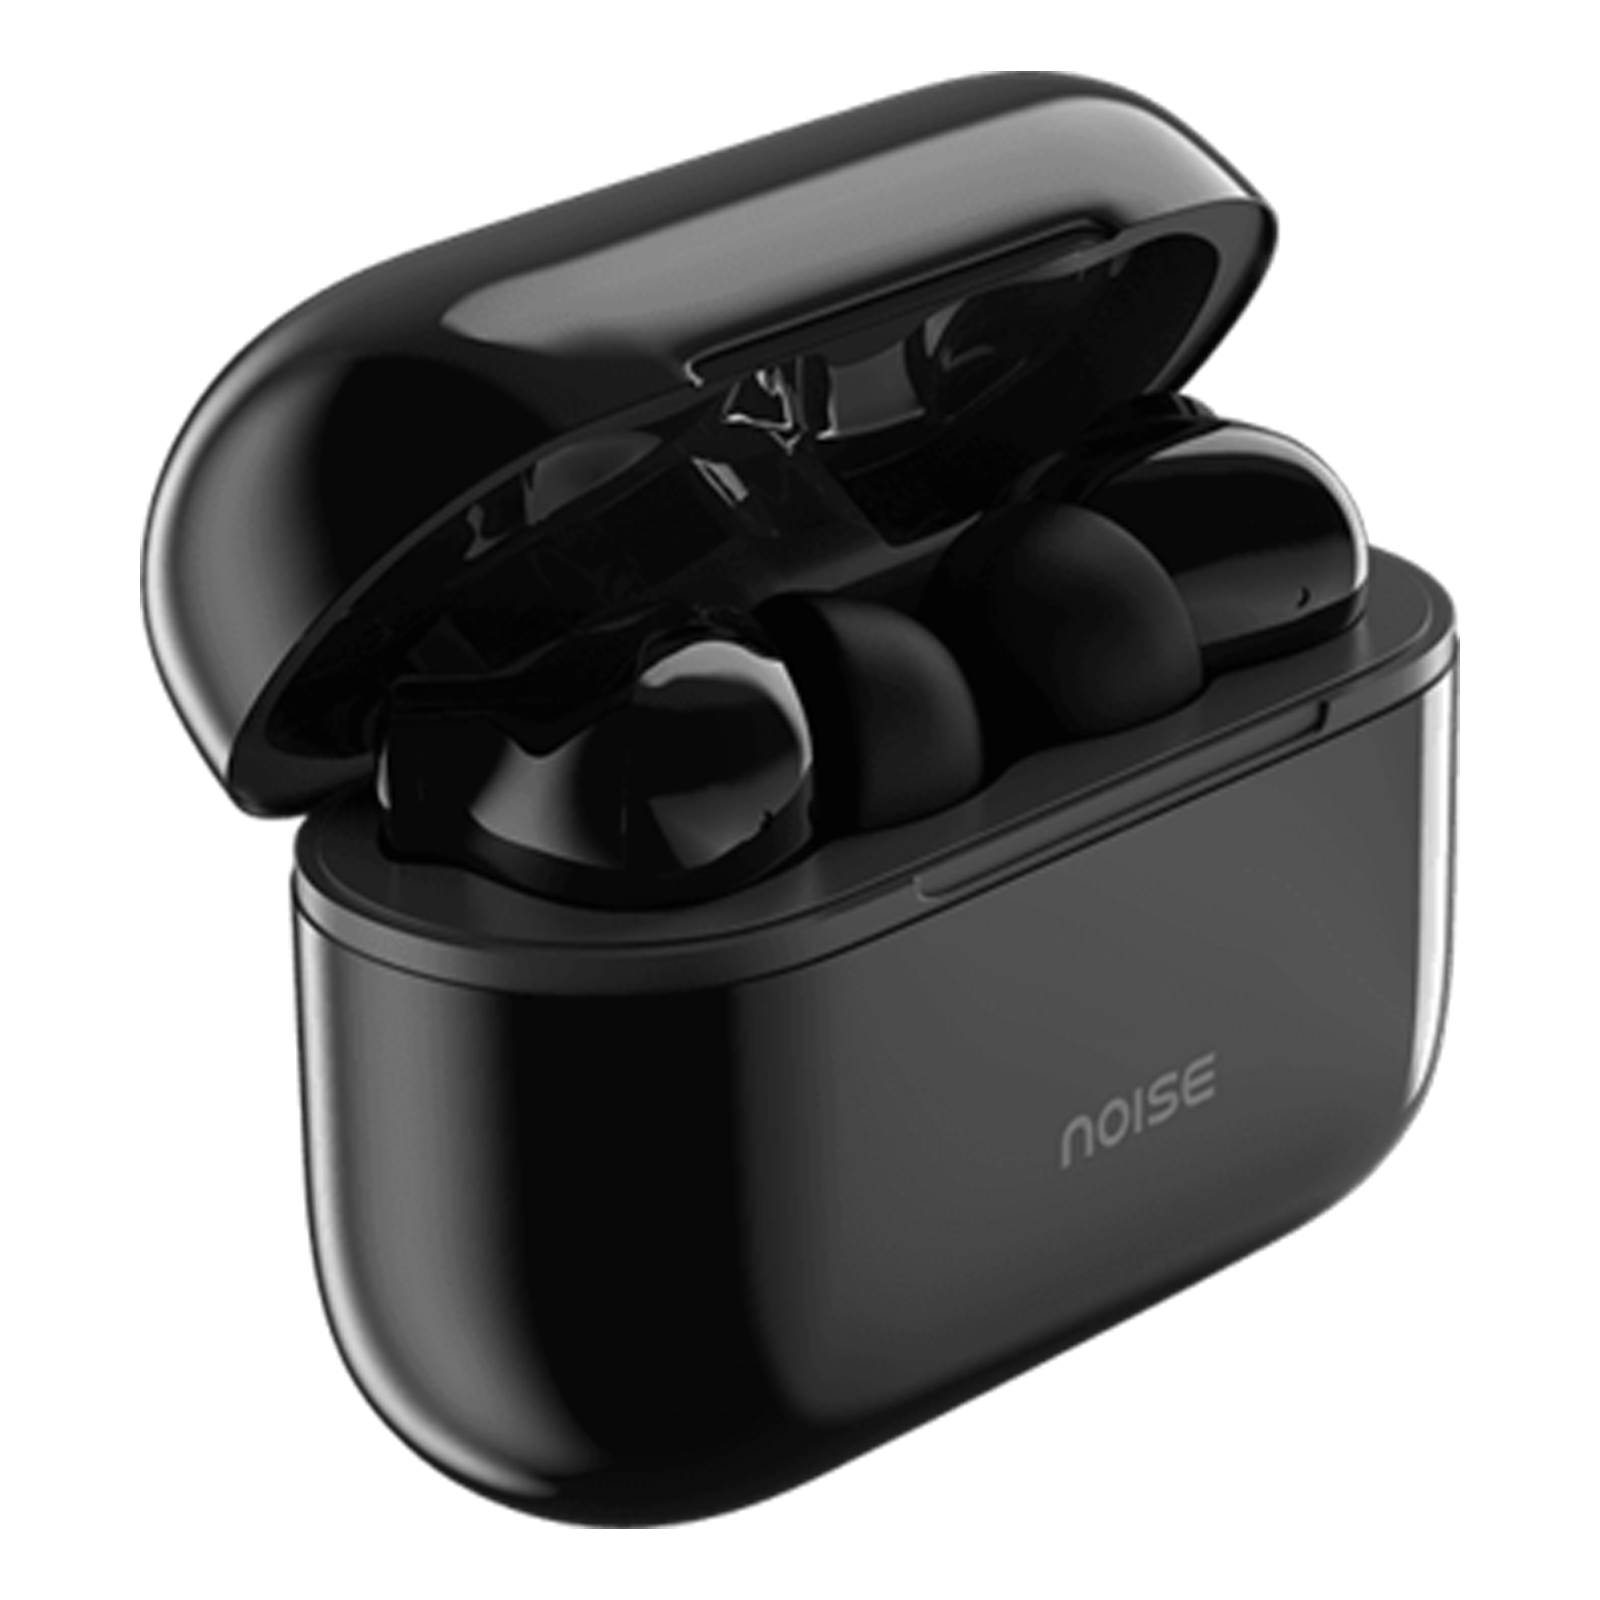 noise - noise Buds In-Ear Truly Wireless Earbuds with Mic (Bluetooth 5.1, Water resistant, AUD-HDPHN-BUDSVS10, Jet Black)